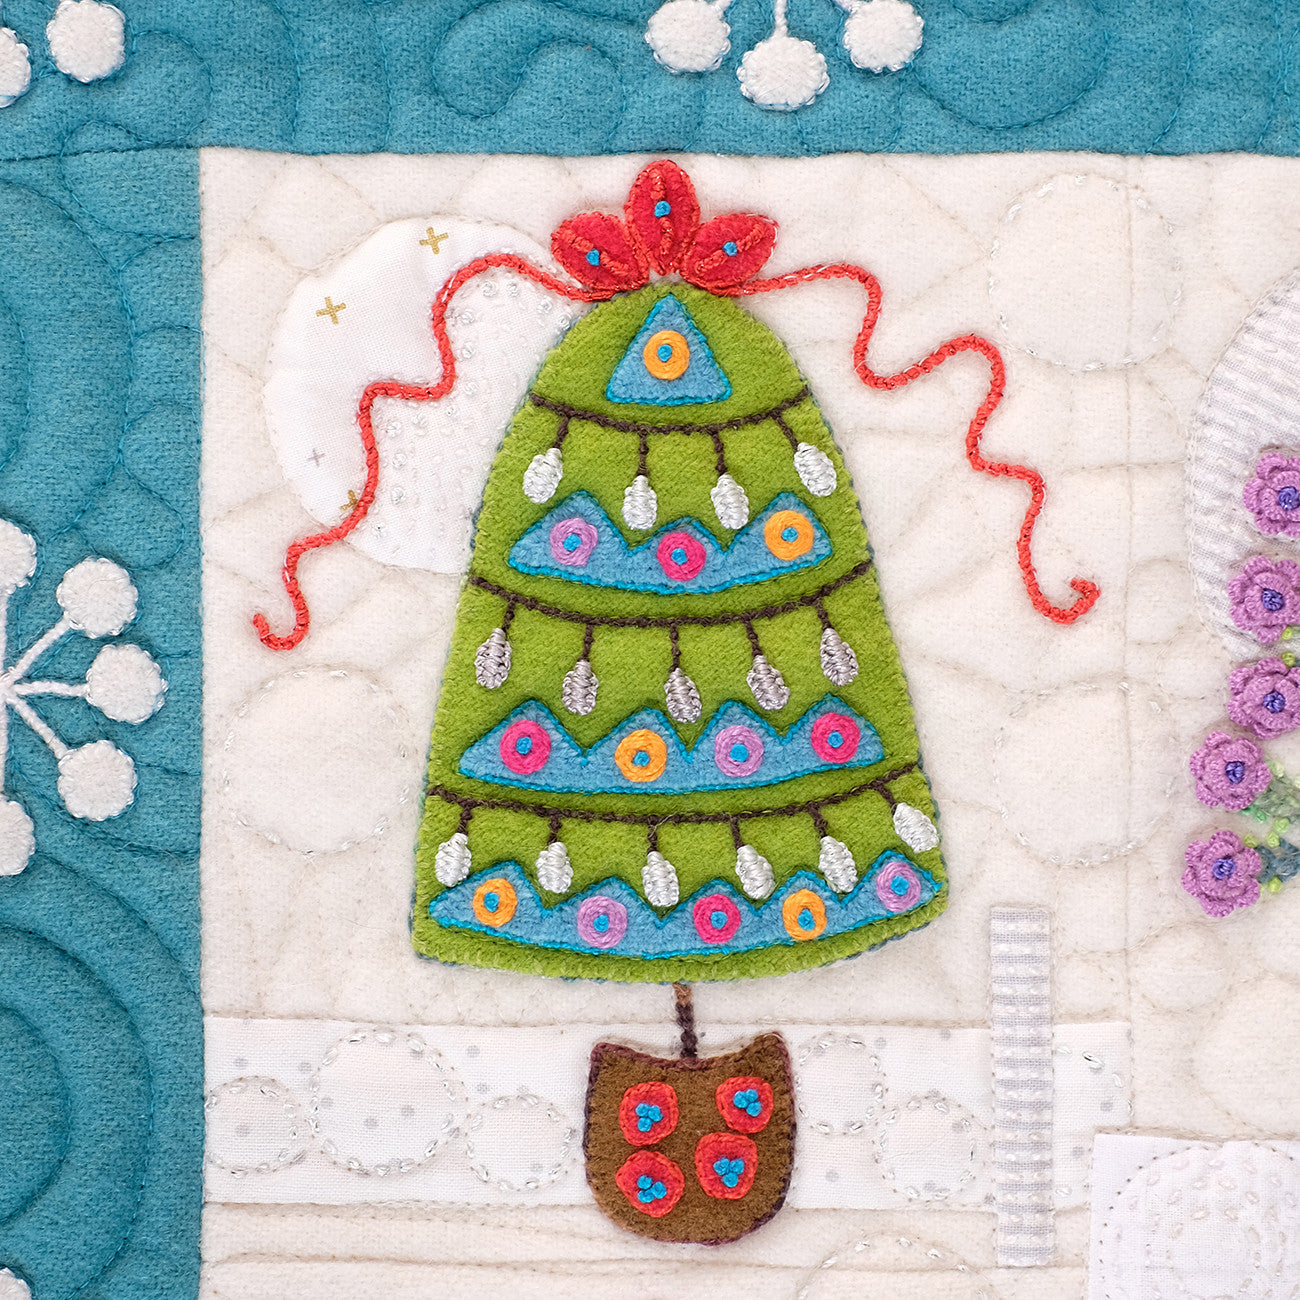 Tinsel - Applique, Embroidery, and Quilt Pattern Book by Sue Spargo of Folk Art Quilts